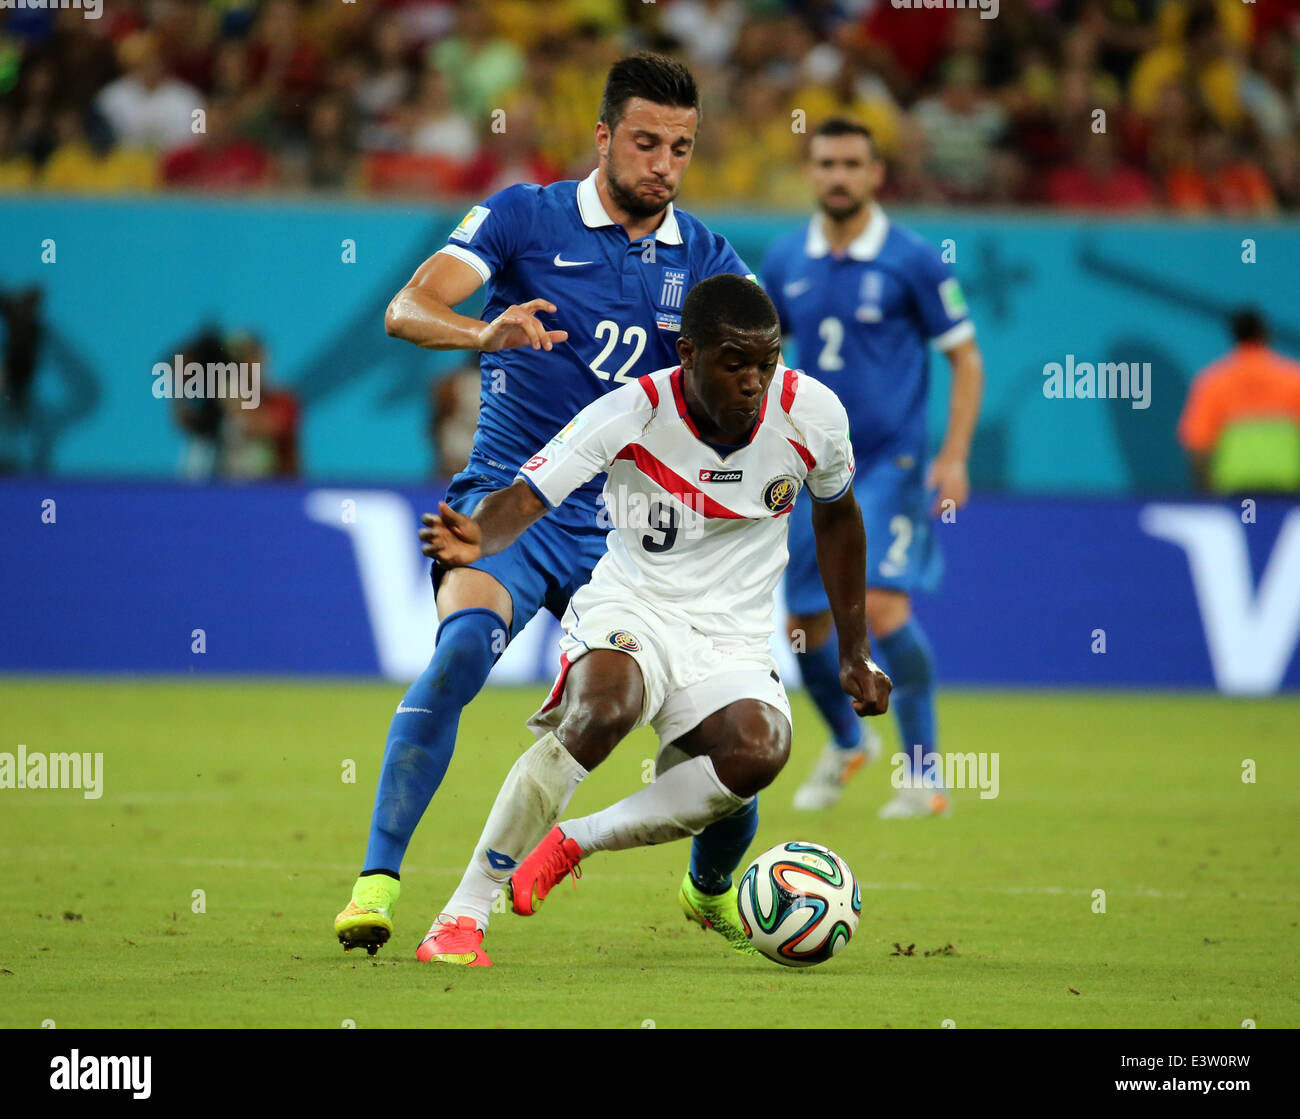 Recife, Brazil. 29th June, 2014. World Cup 2nd Round. Costa Rica versus Greece. Campbell challenged by Samaris Credit:  Action Plus Sports/Alamy Live News Stock Photo